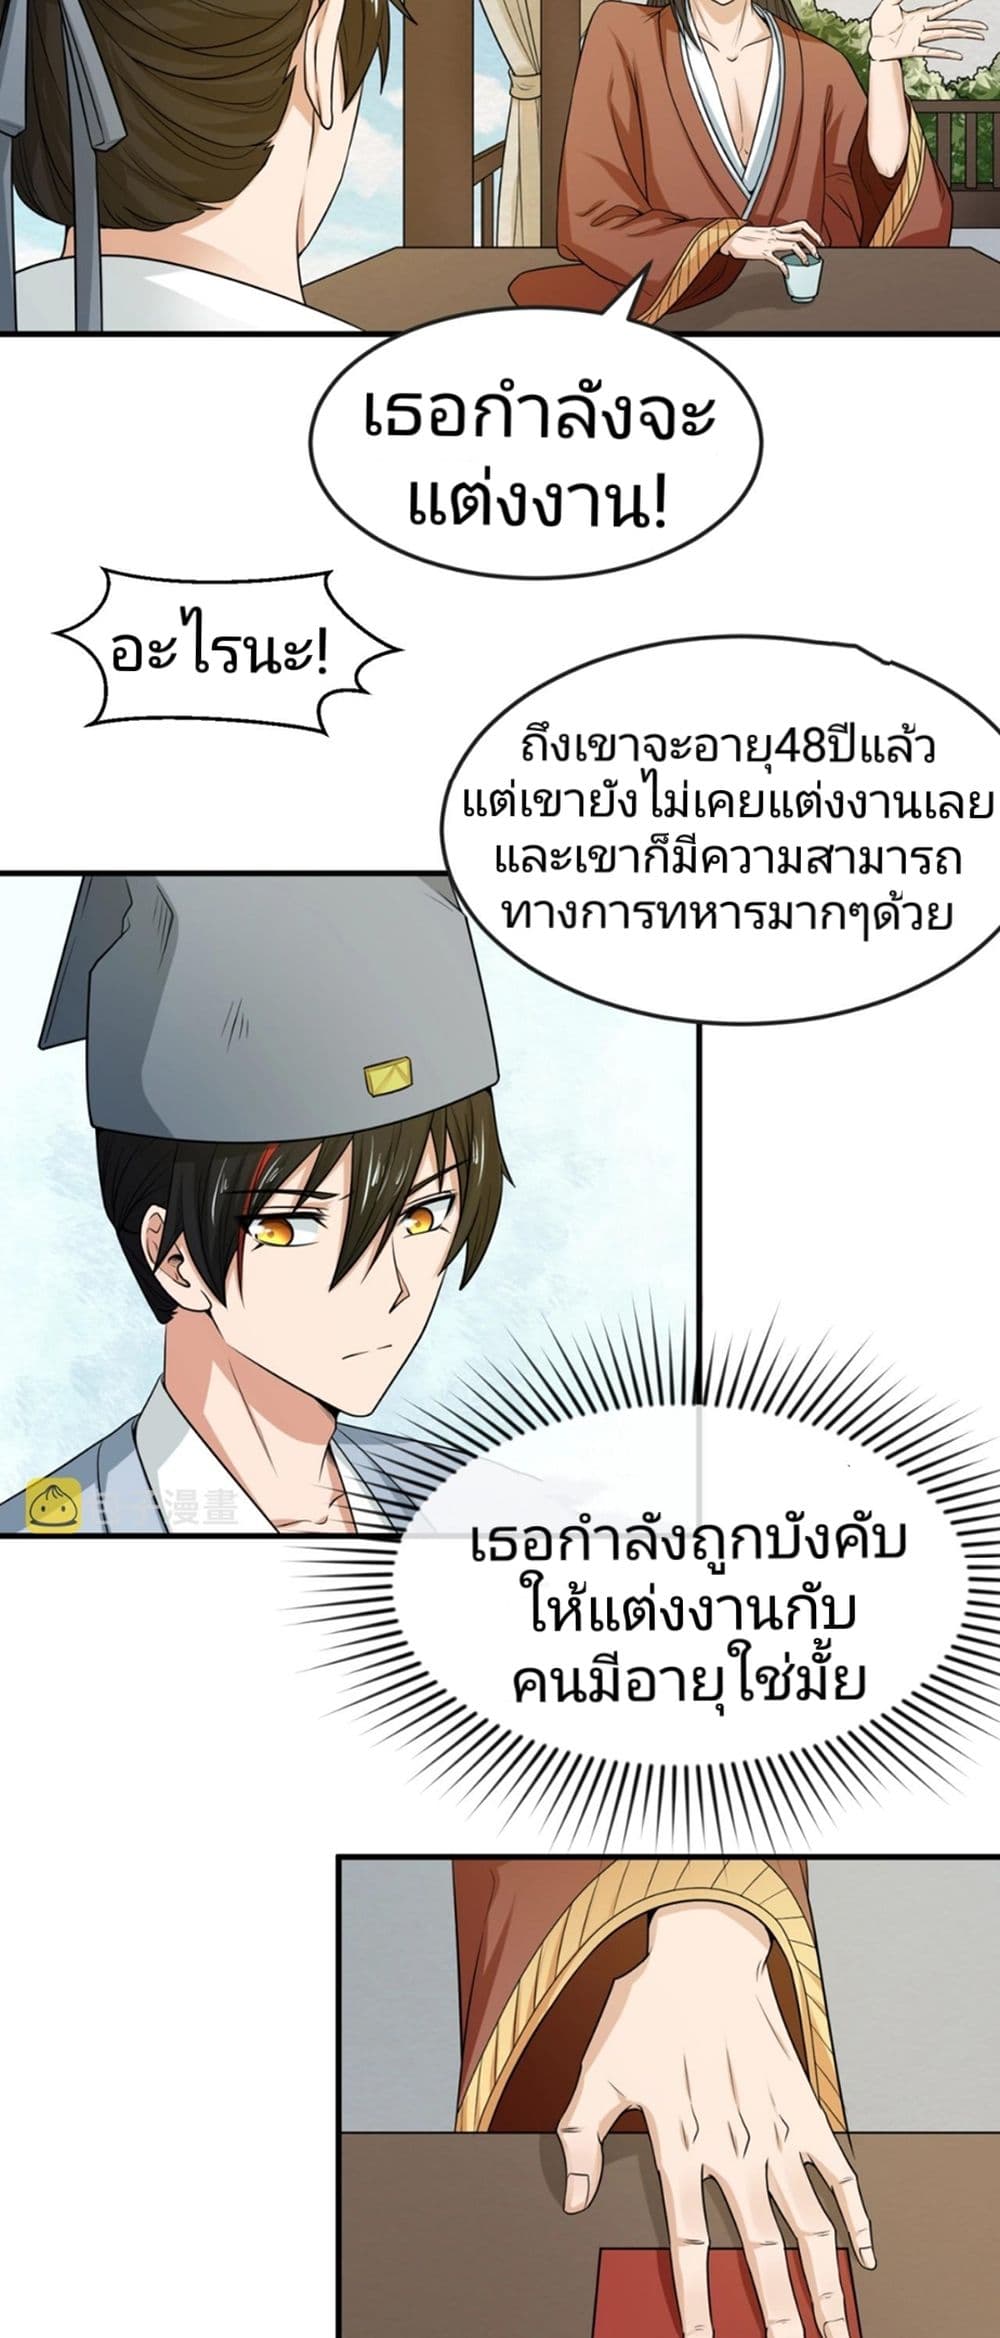 The Age of Ghost Spirits à¸à¸­à¸à¸à¸µà¹ 14 (31)